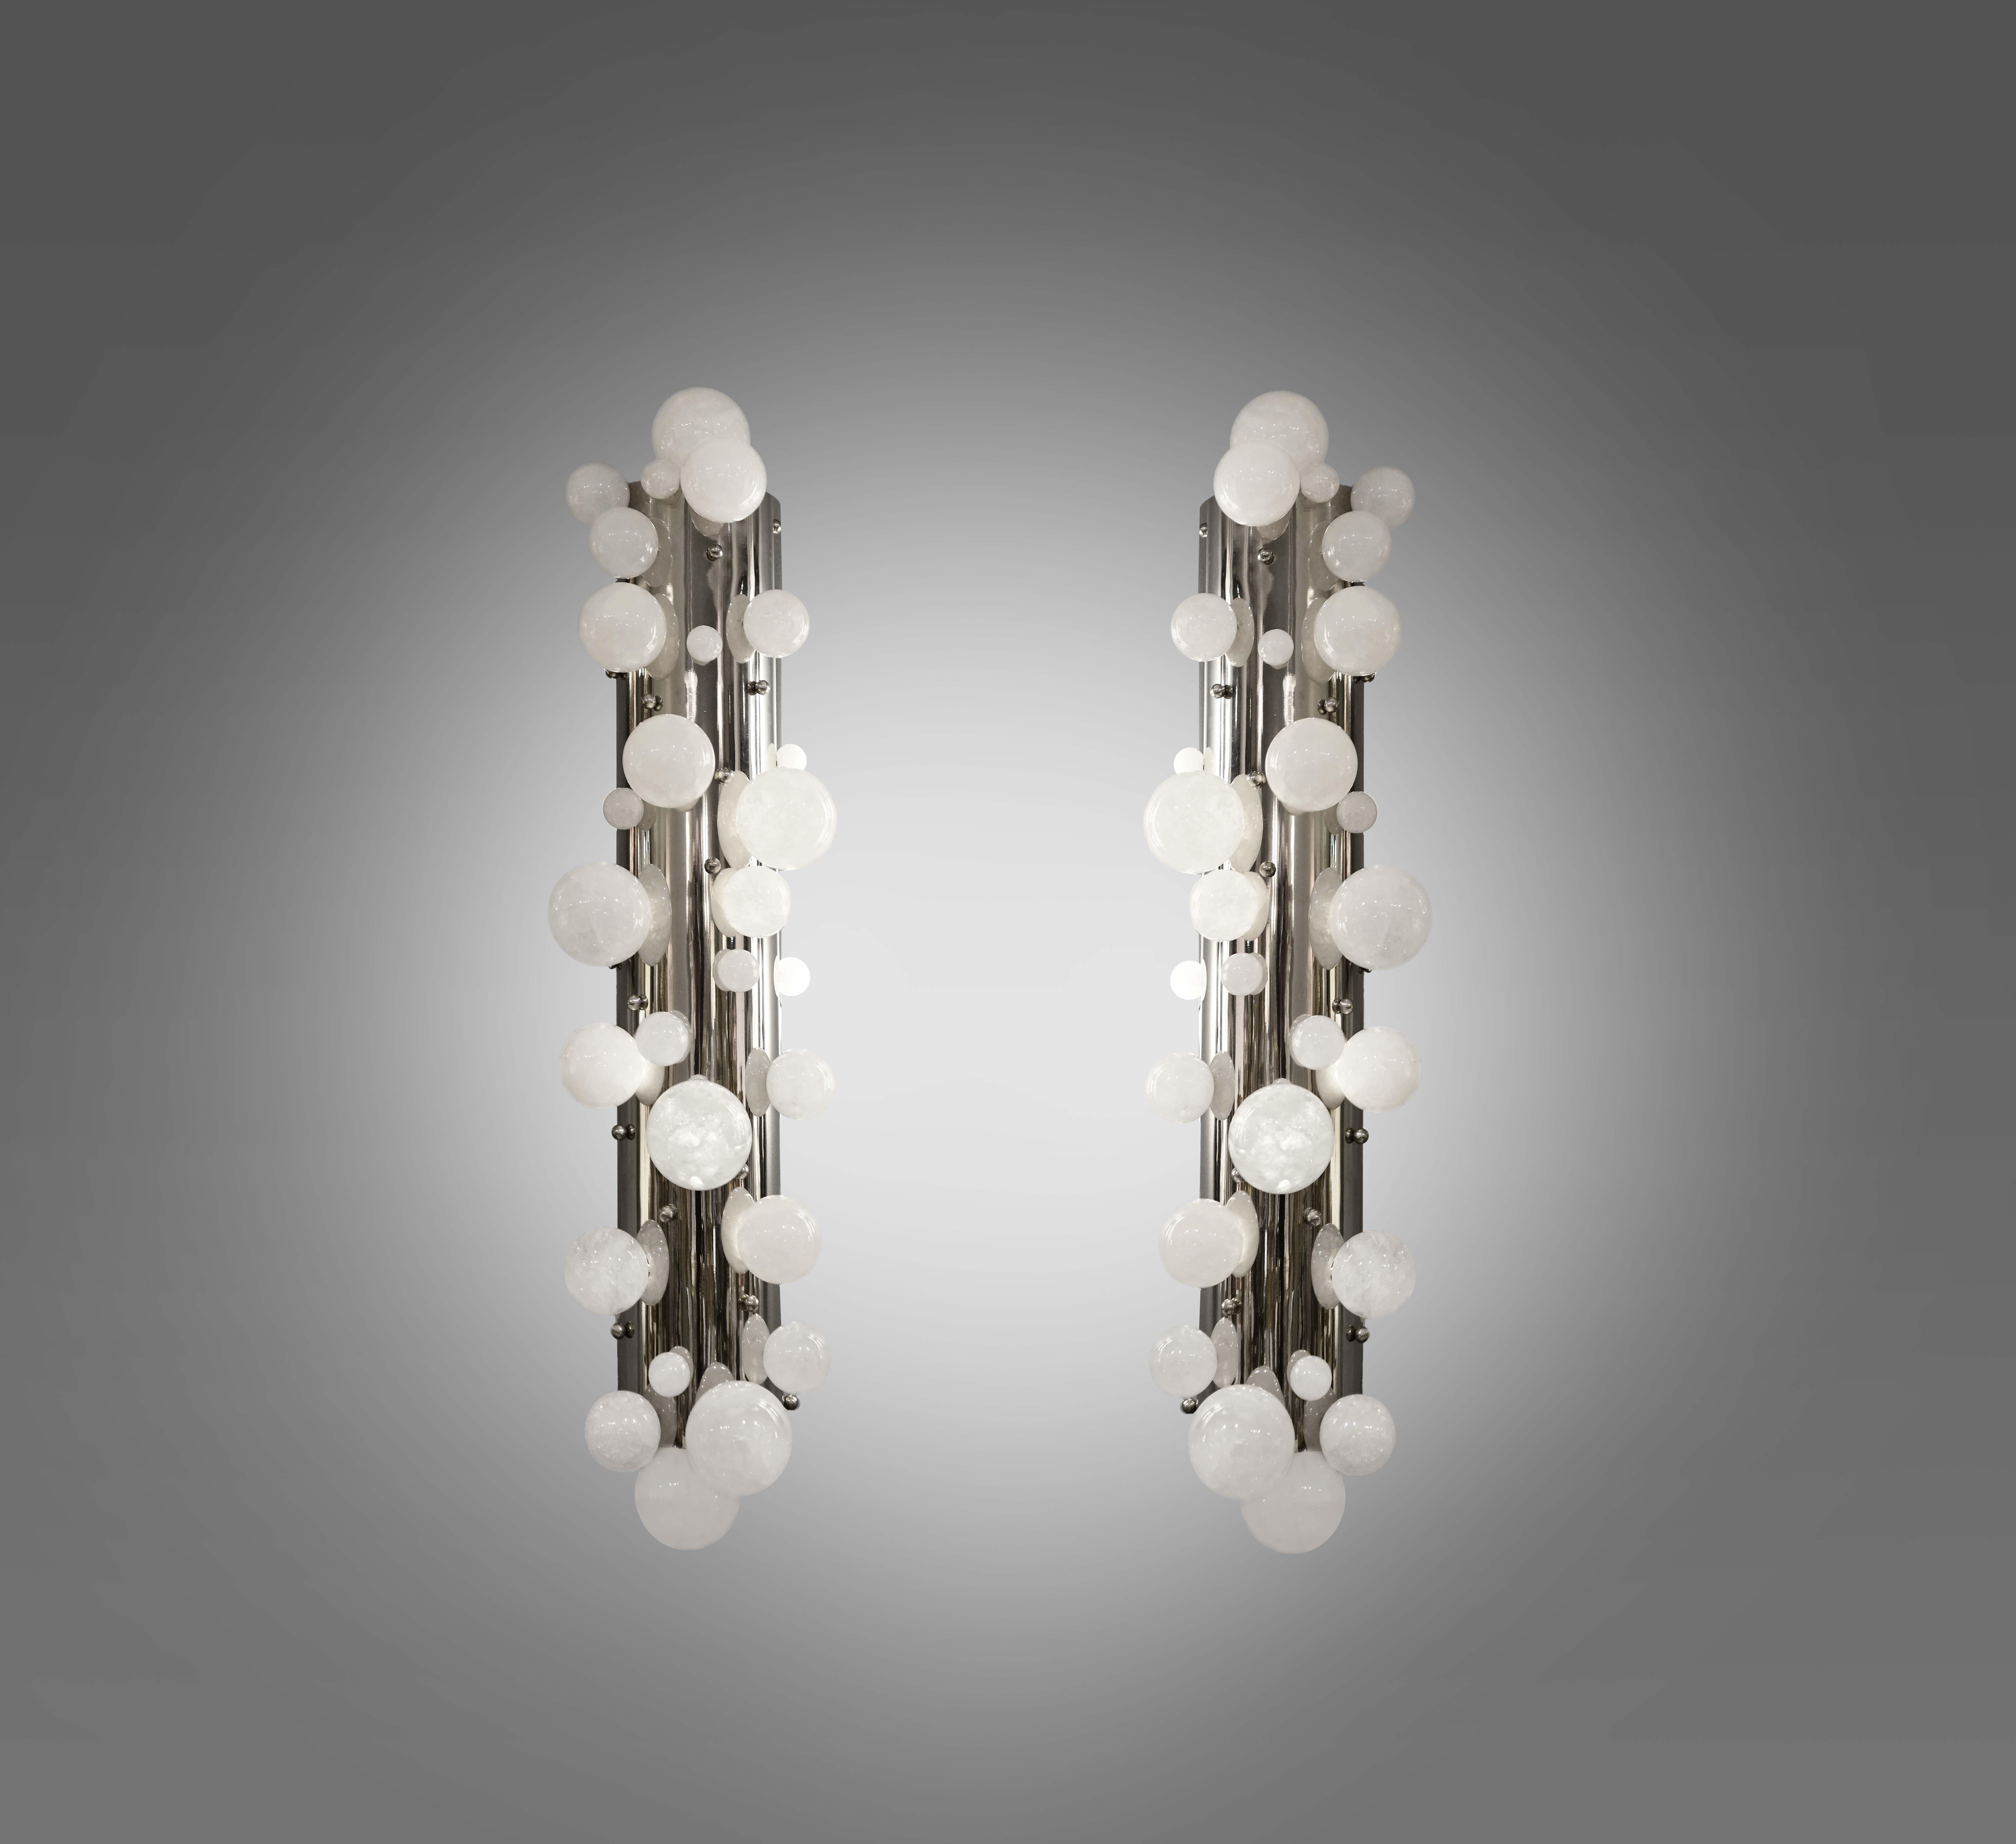 Pair of bubble rock crystal sconces with the polish nickel mounted. Created by Phoenix gallery NYC.
Each sconce installed two sockets, 160 W max. 